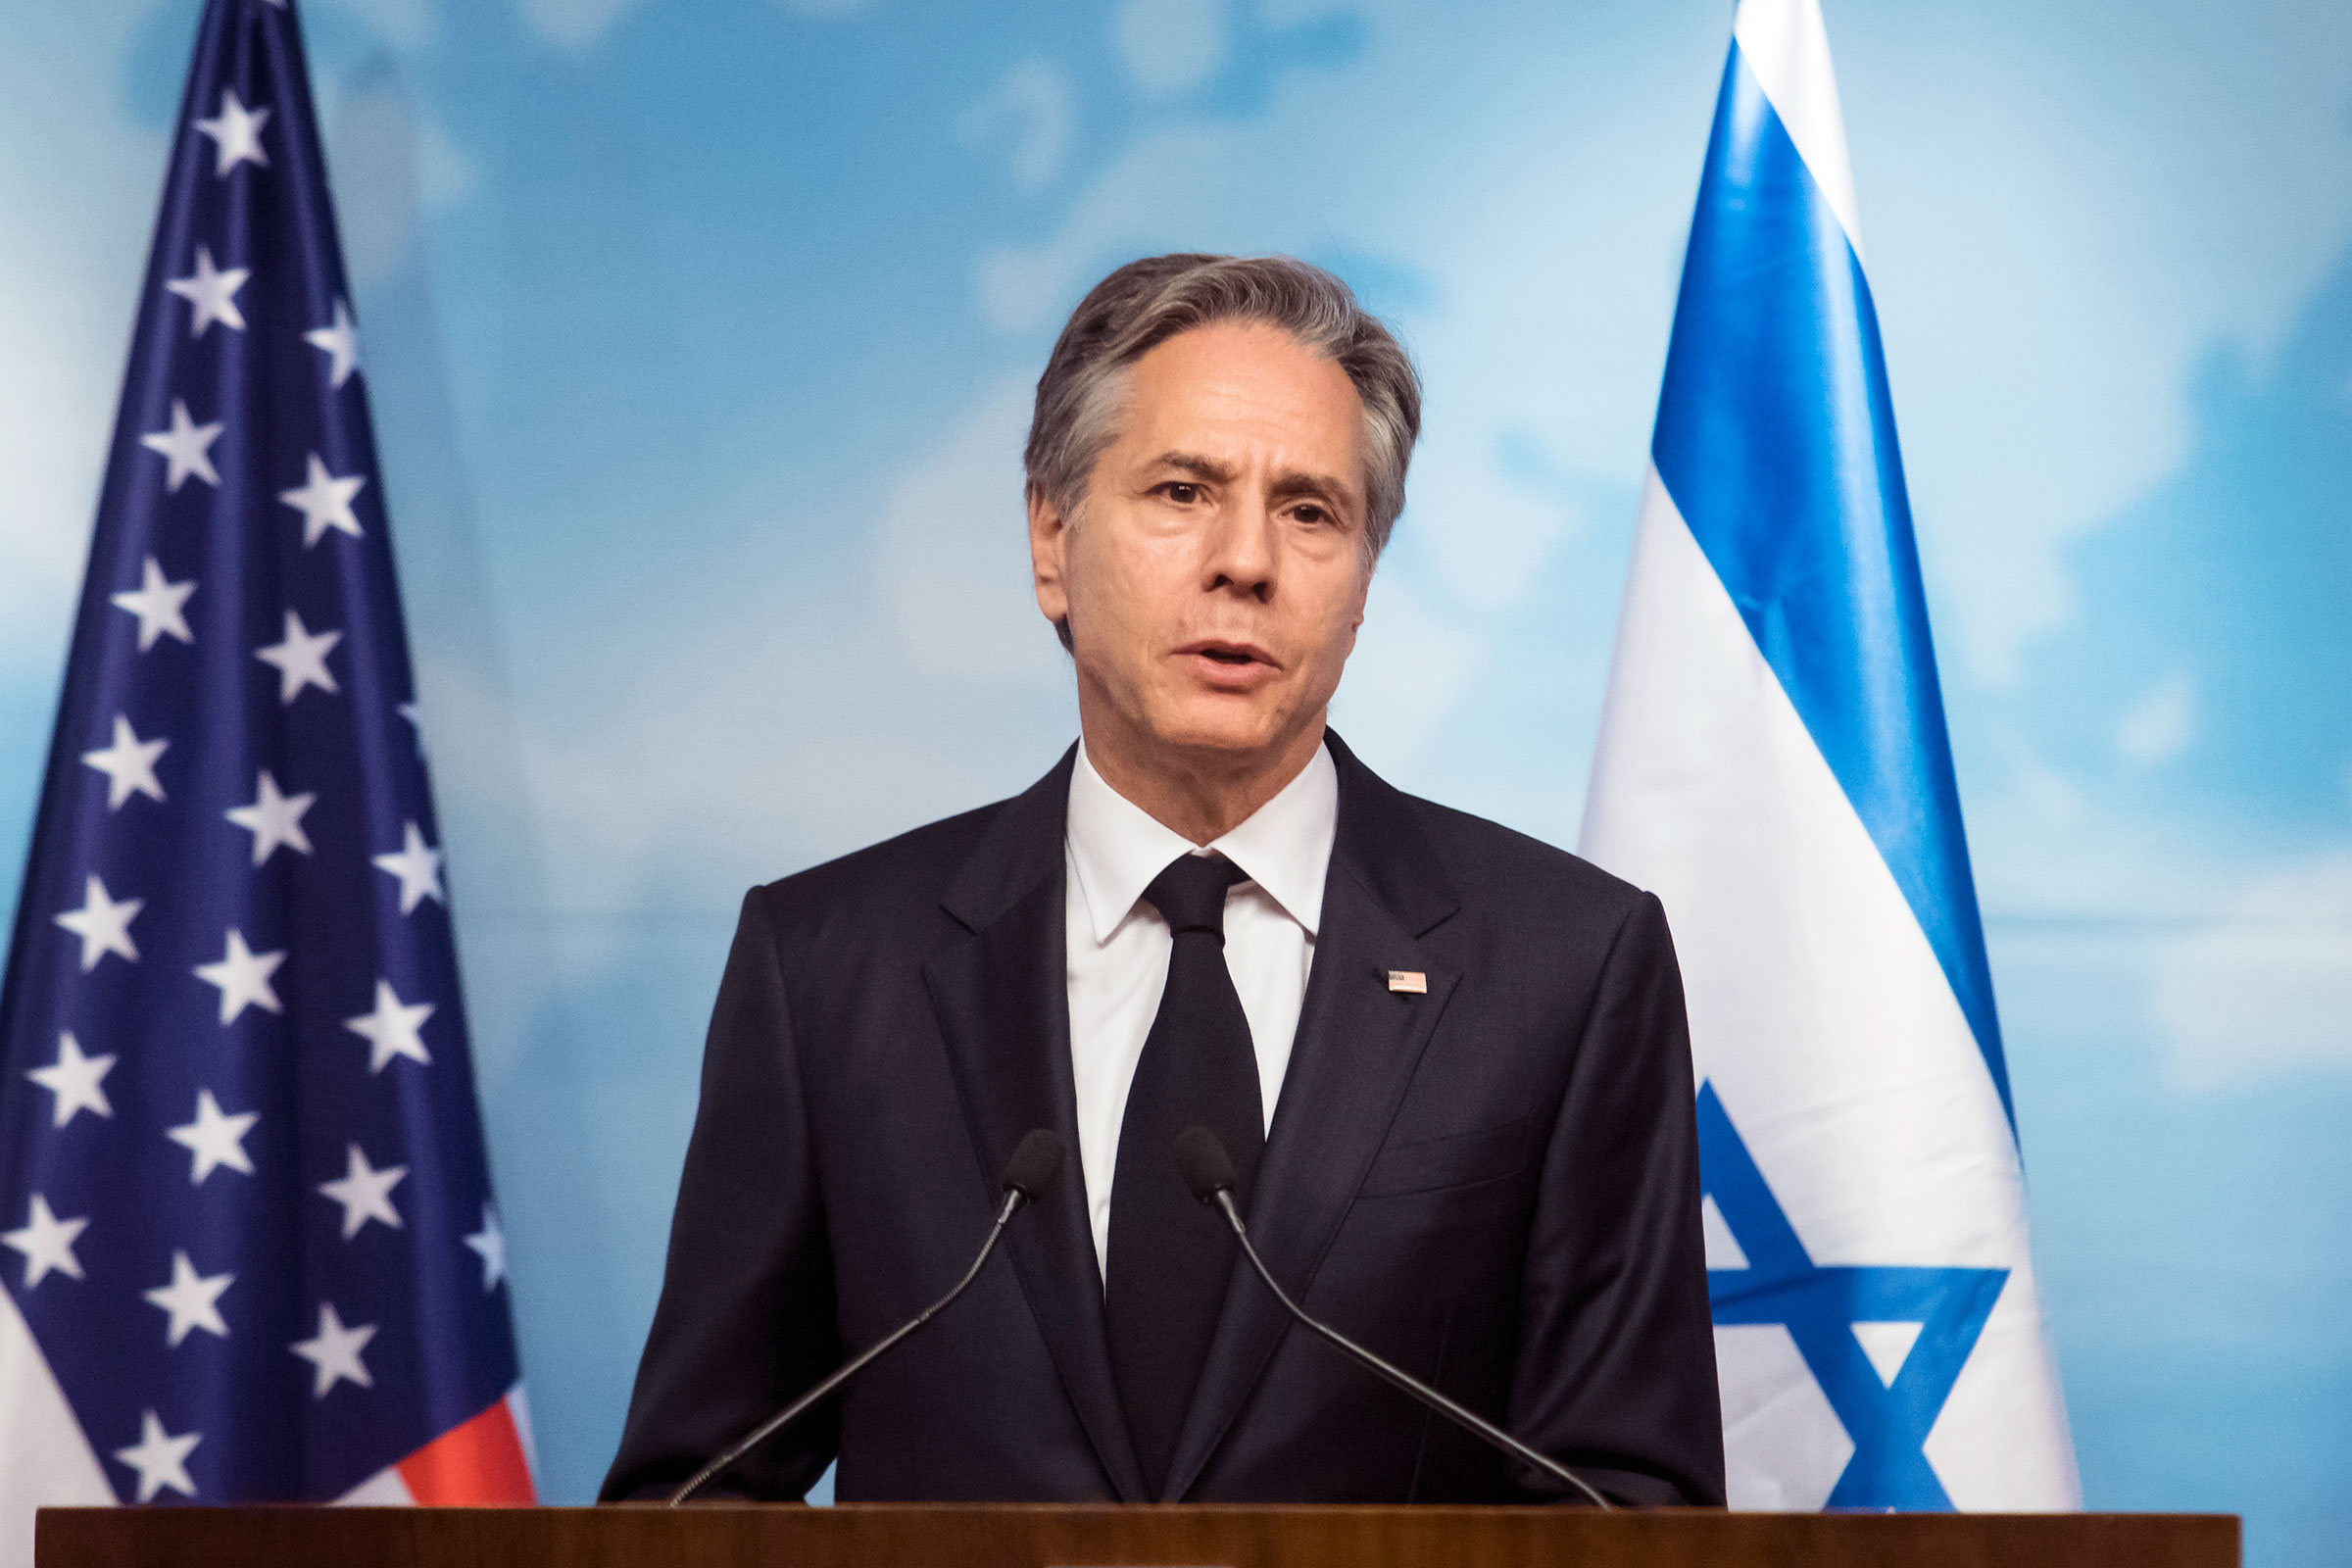 Antony Blinken stands in front of U.S. and Israeli flags while delivering a speech